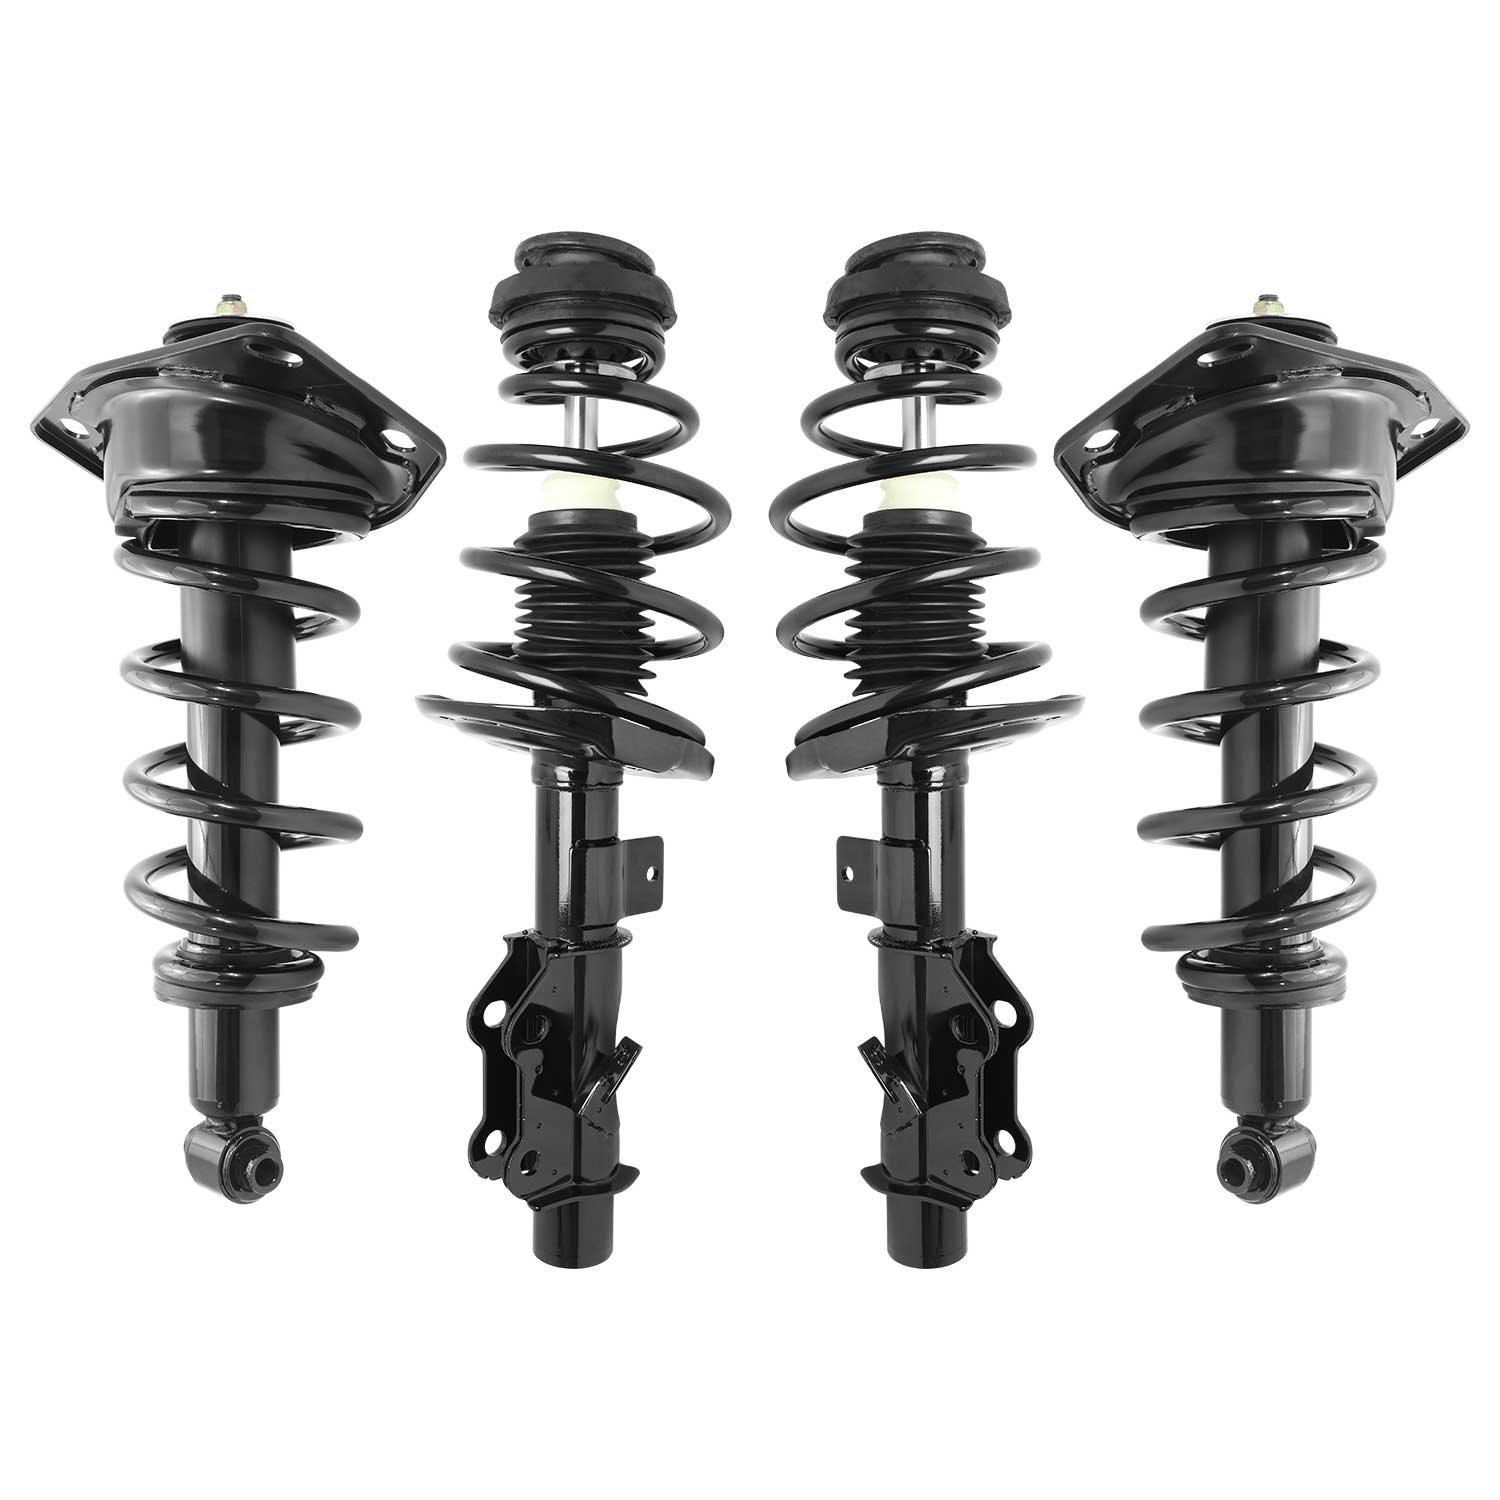 4-11623-15201-001 Front & Rear Suspension Strut & Coil Spring Assembly Kit Fits Select Chevy Camaro